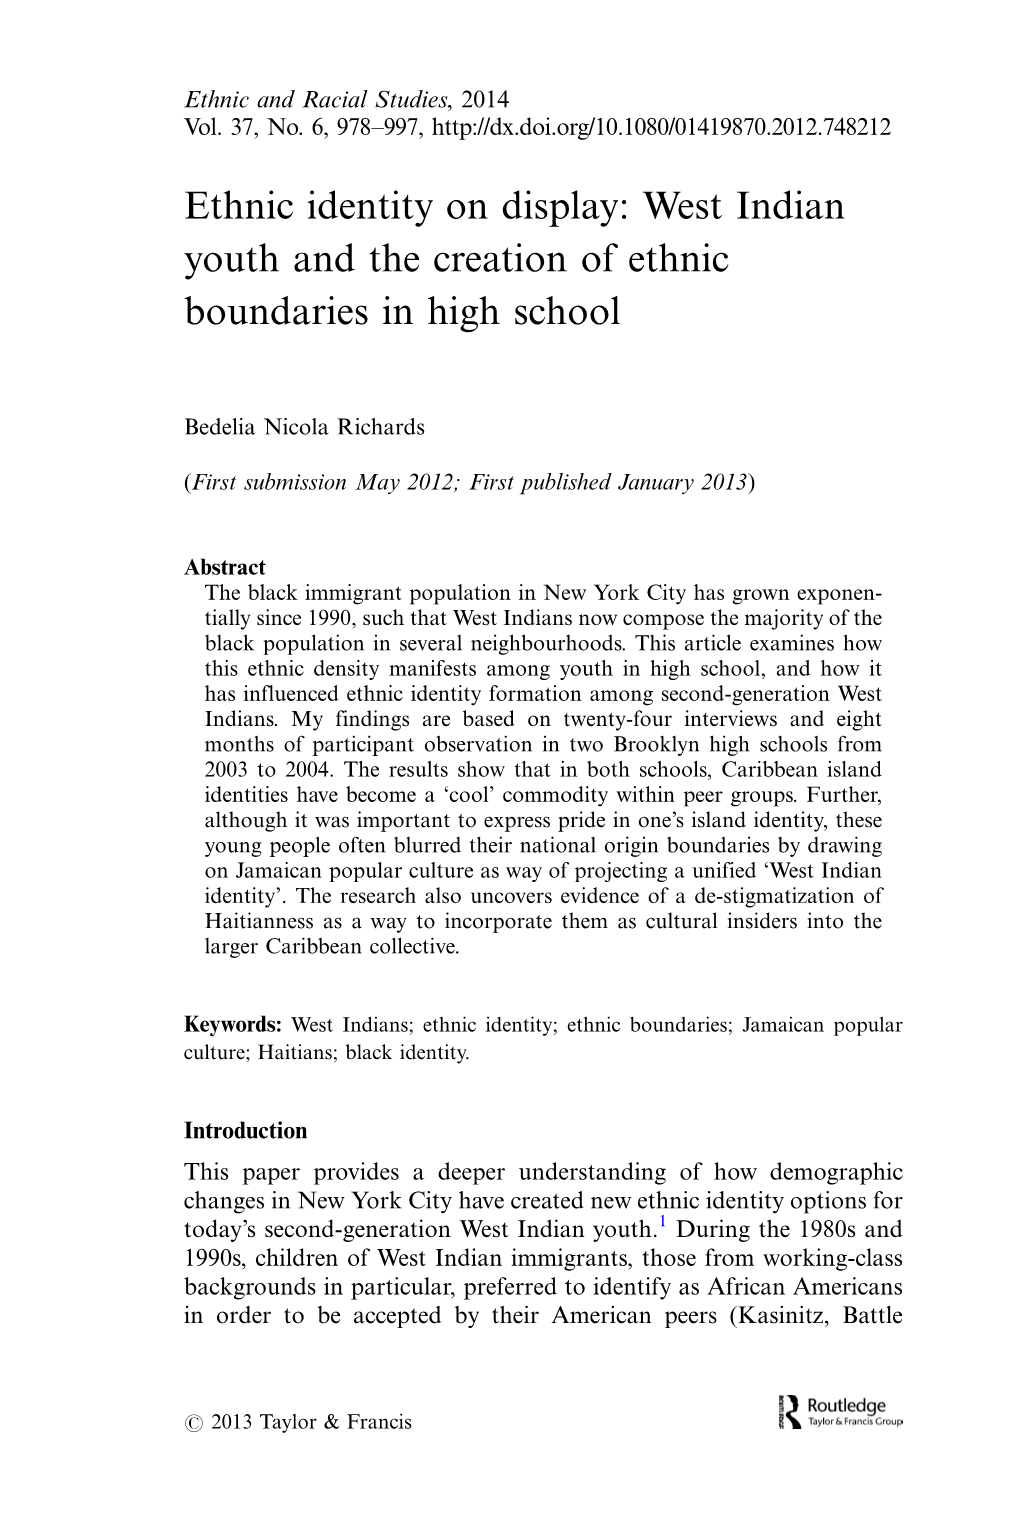 West Indian Youth and the Creation of Ethnic Boundaries in High School